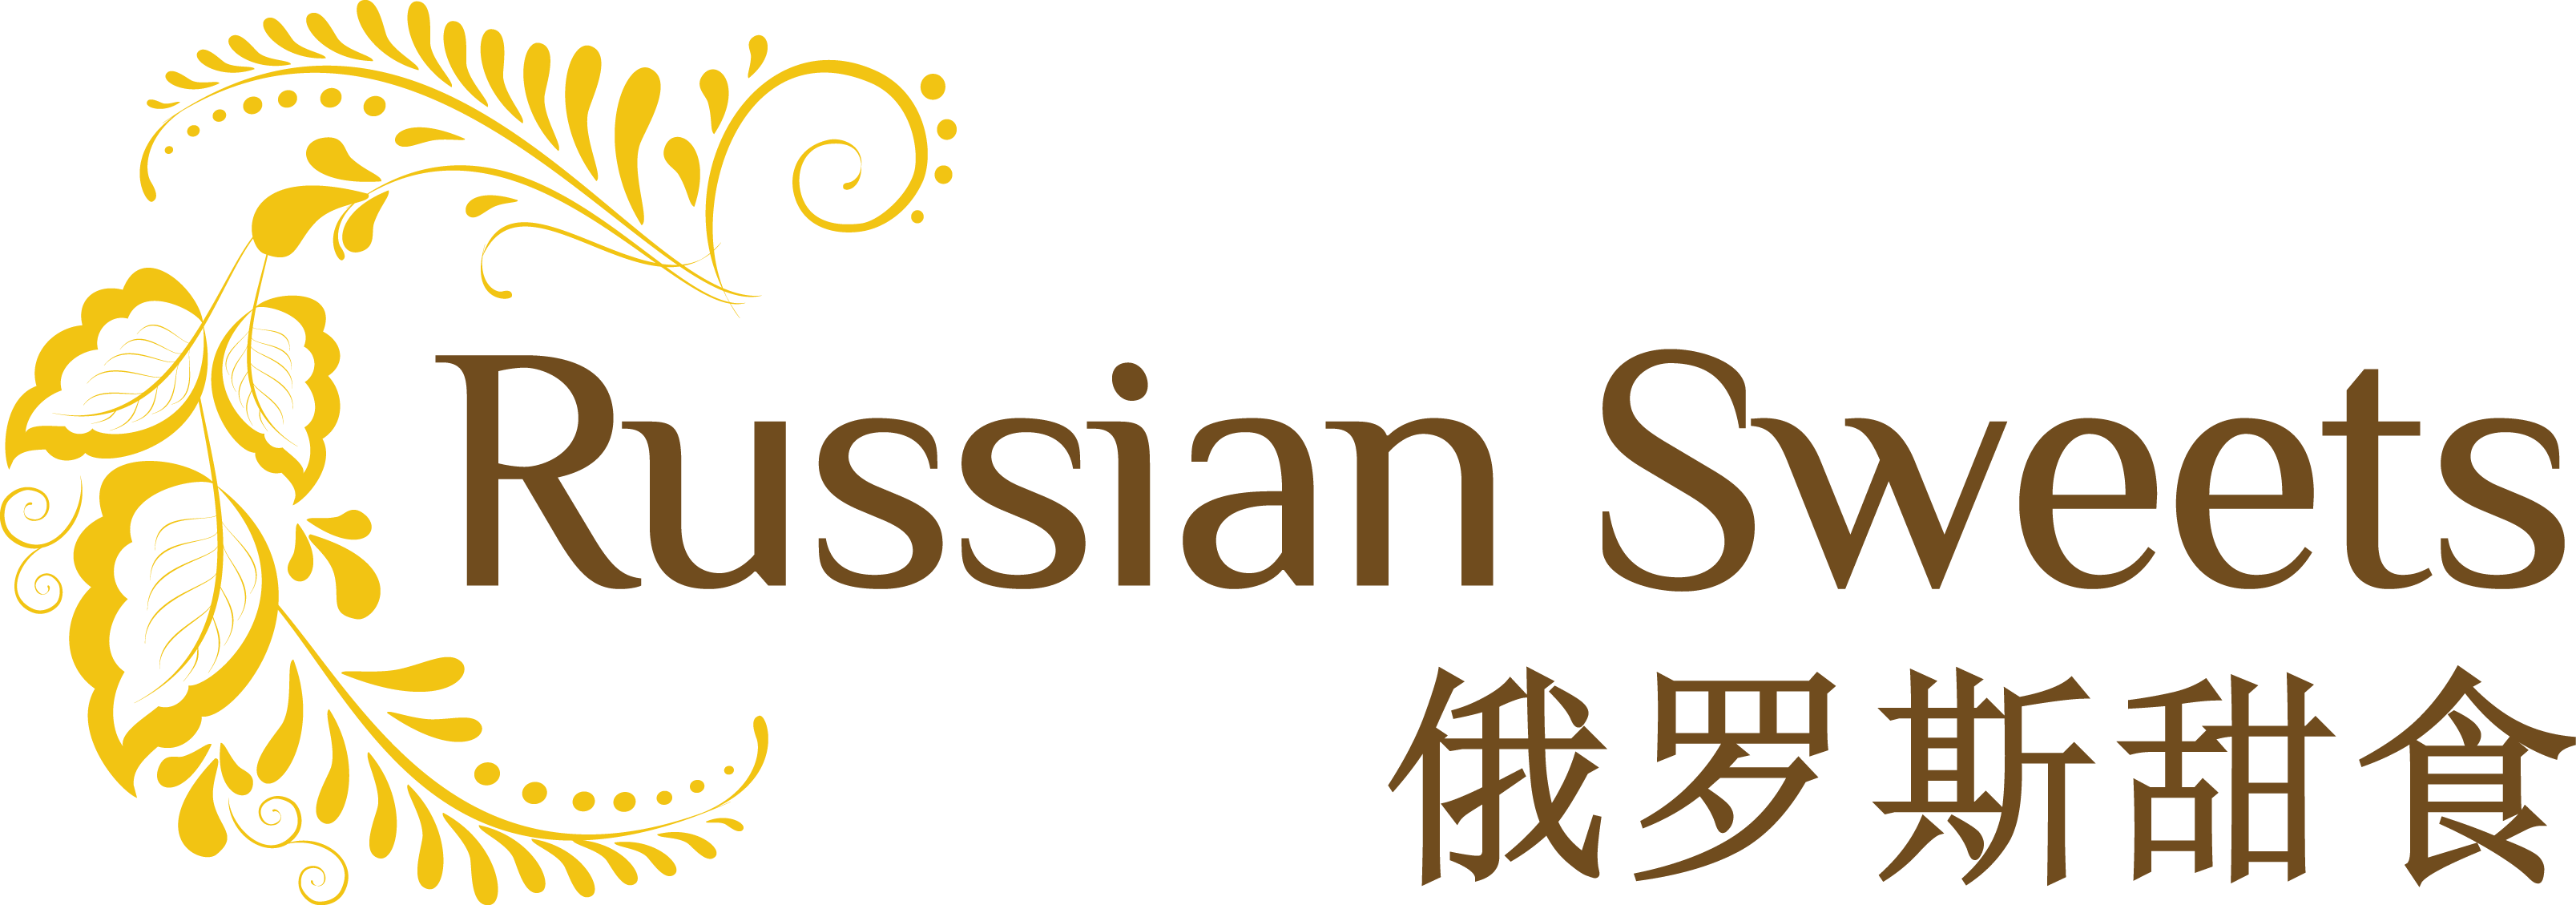 russweets logo 01 A4